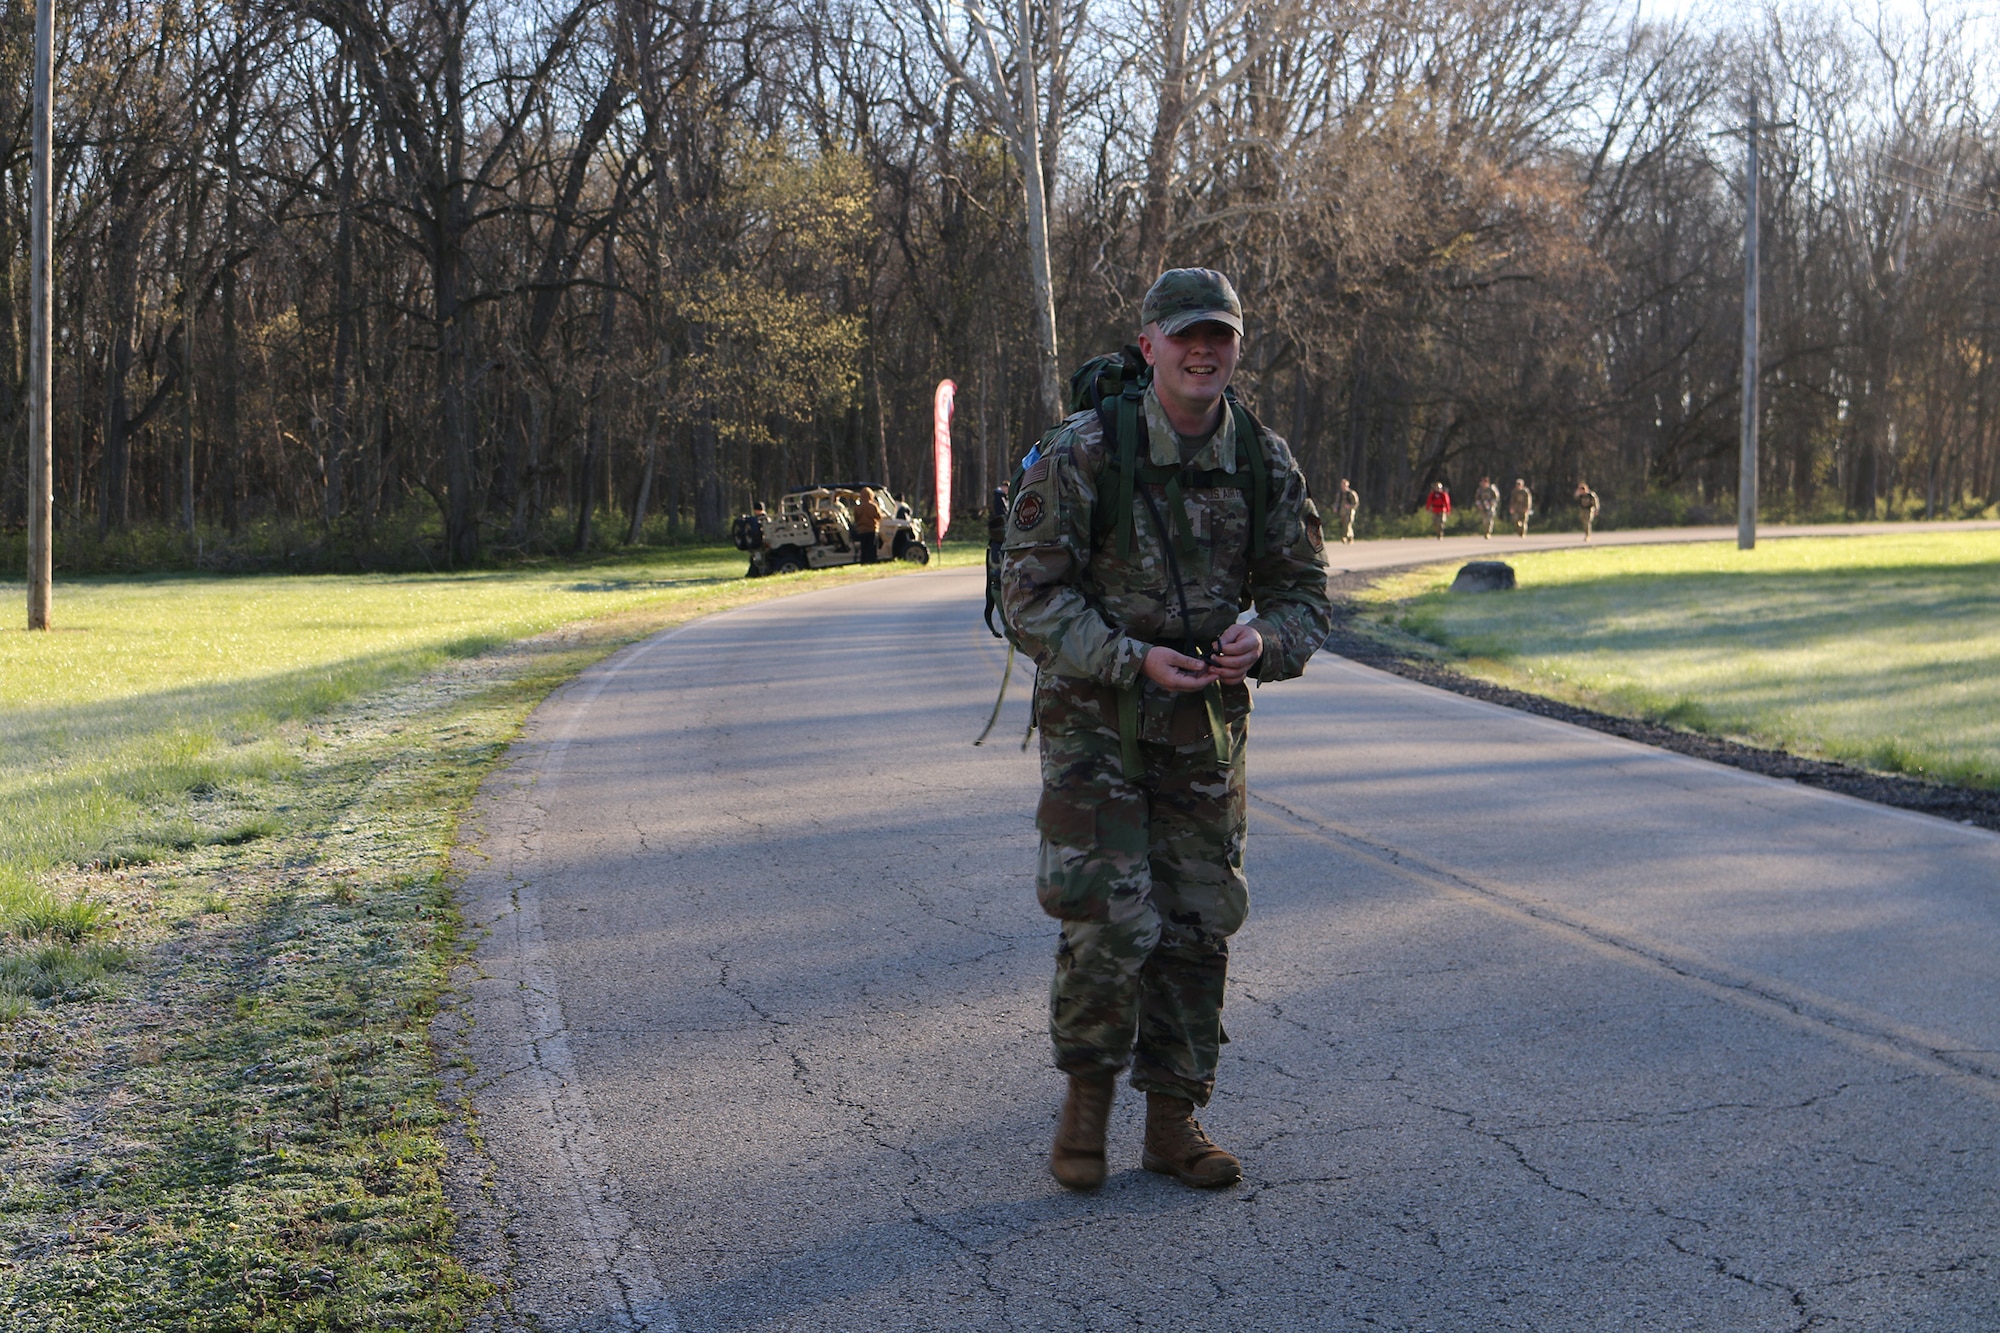 Tech. Sgt. Bryce Phelps, 87th Aerial Port Squadron, was among 100 participants to complete the 18 mile Norwegian foot march hosted by the 88th Security Forces Squadron at Wright-Patterson Air Force Base, Ohio April 6, 2024. The participants carried backpacks weighing at least 25 pounds around the course.